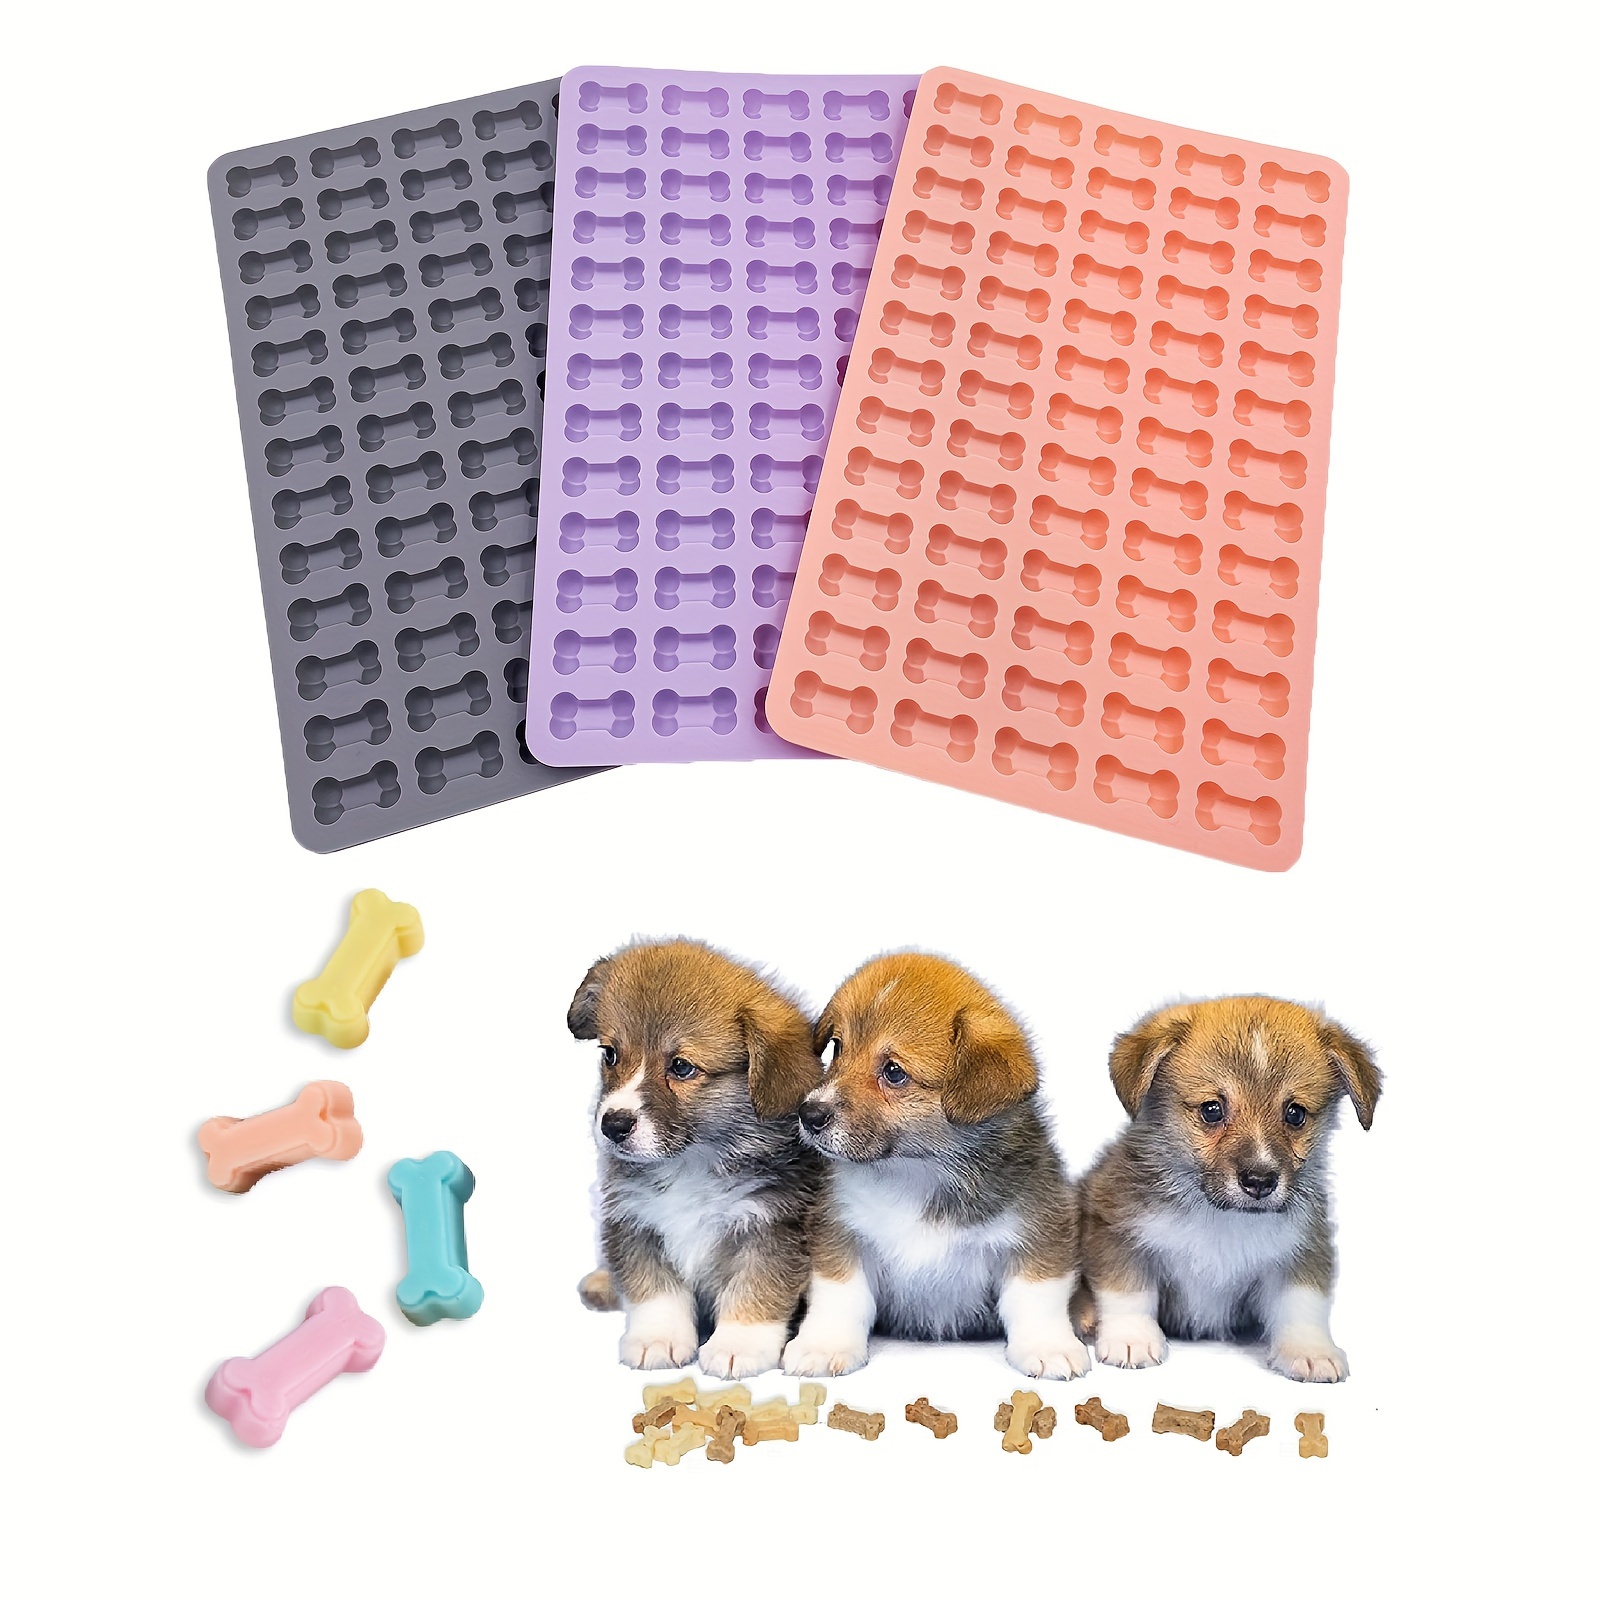 

Silicone Dog Treat Molds - Mini Bone-shaped Cookie, Chocolate, Ice Cube, Candy Mold For Pet Treats - Non-battery, Puppy Care Baking Supplies (1 Piece)